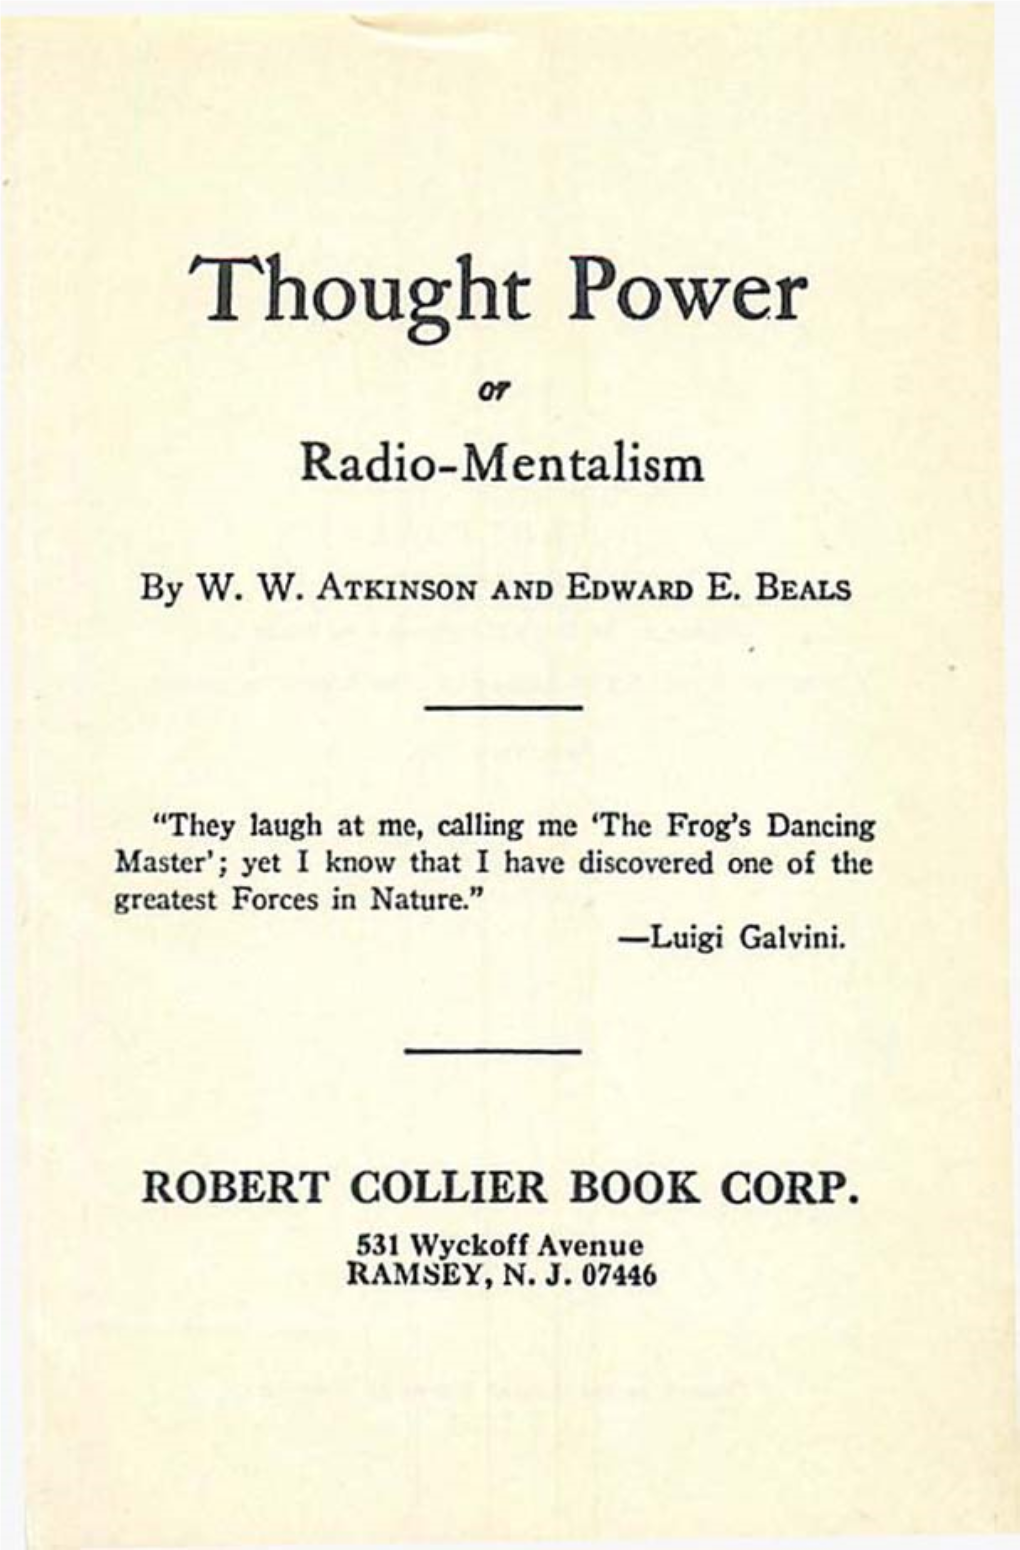 Thought Power Or Radio-Mentalism